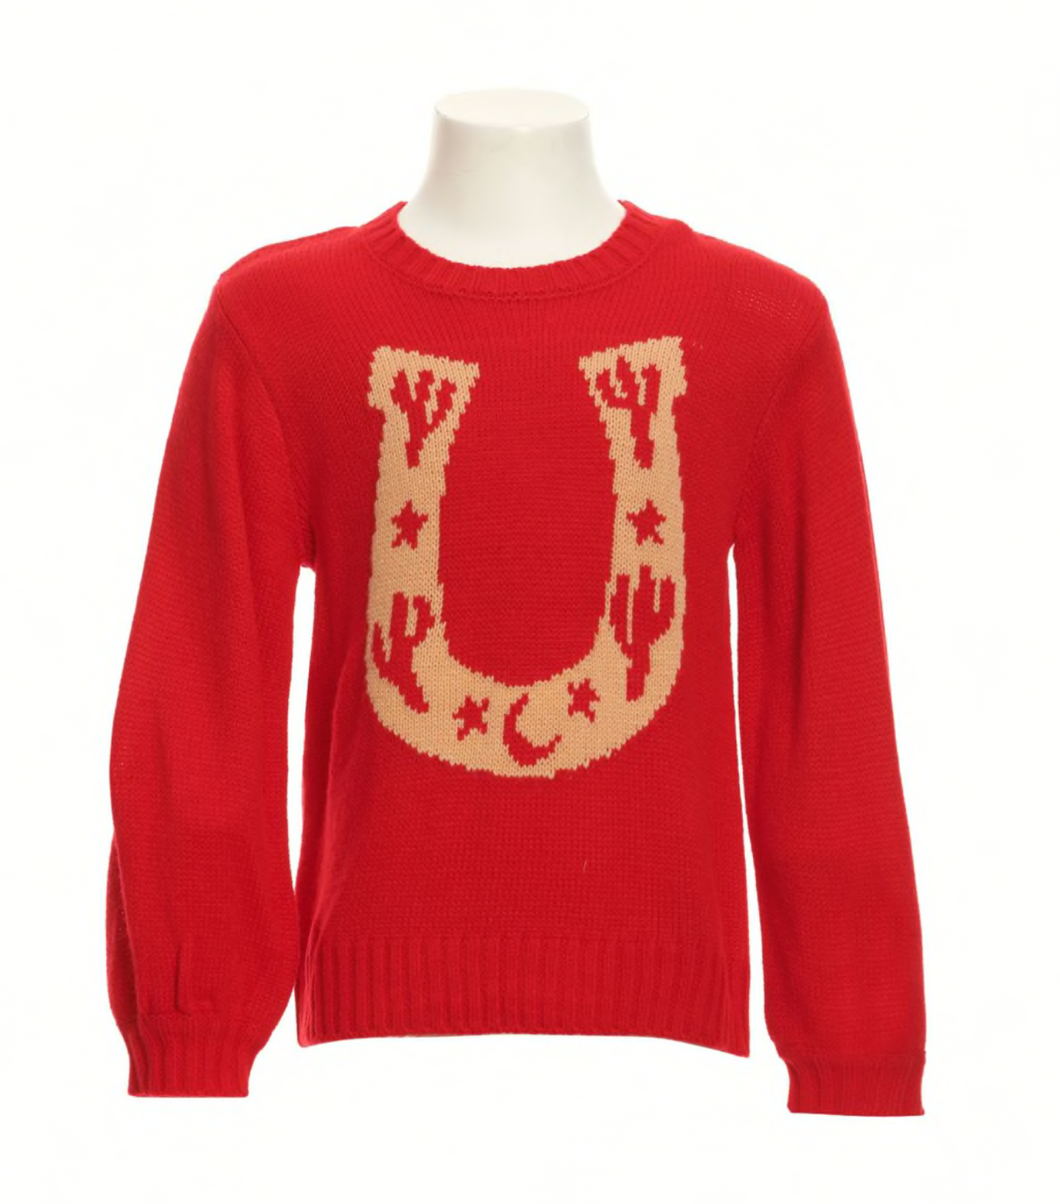 Wrangler Girl's Red with Antique Gold Horseshoe Long Sleeve Sweater